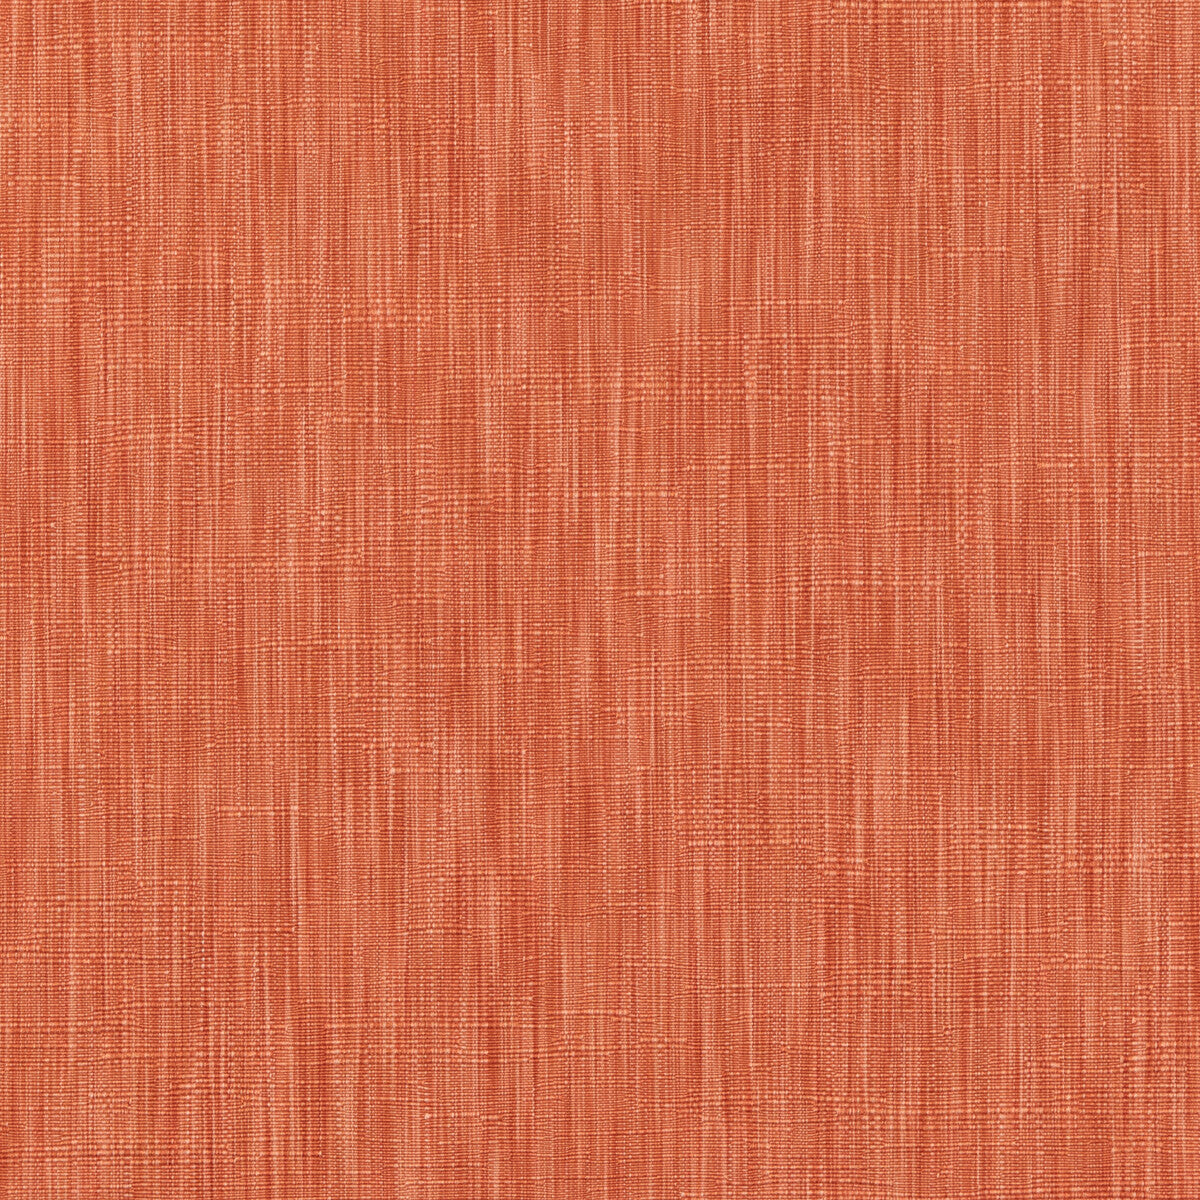 Saverne Texture fabric in orange color - pattern 8019122.12.0 - by Brunschwig &amp; Fils in the Alsace Weaves collection